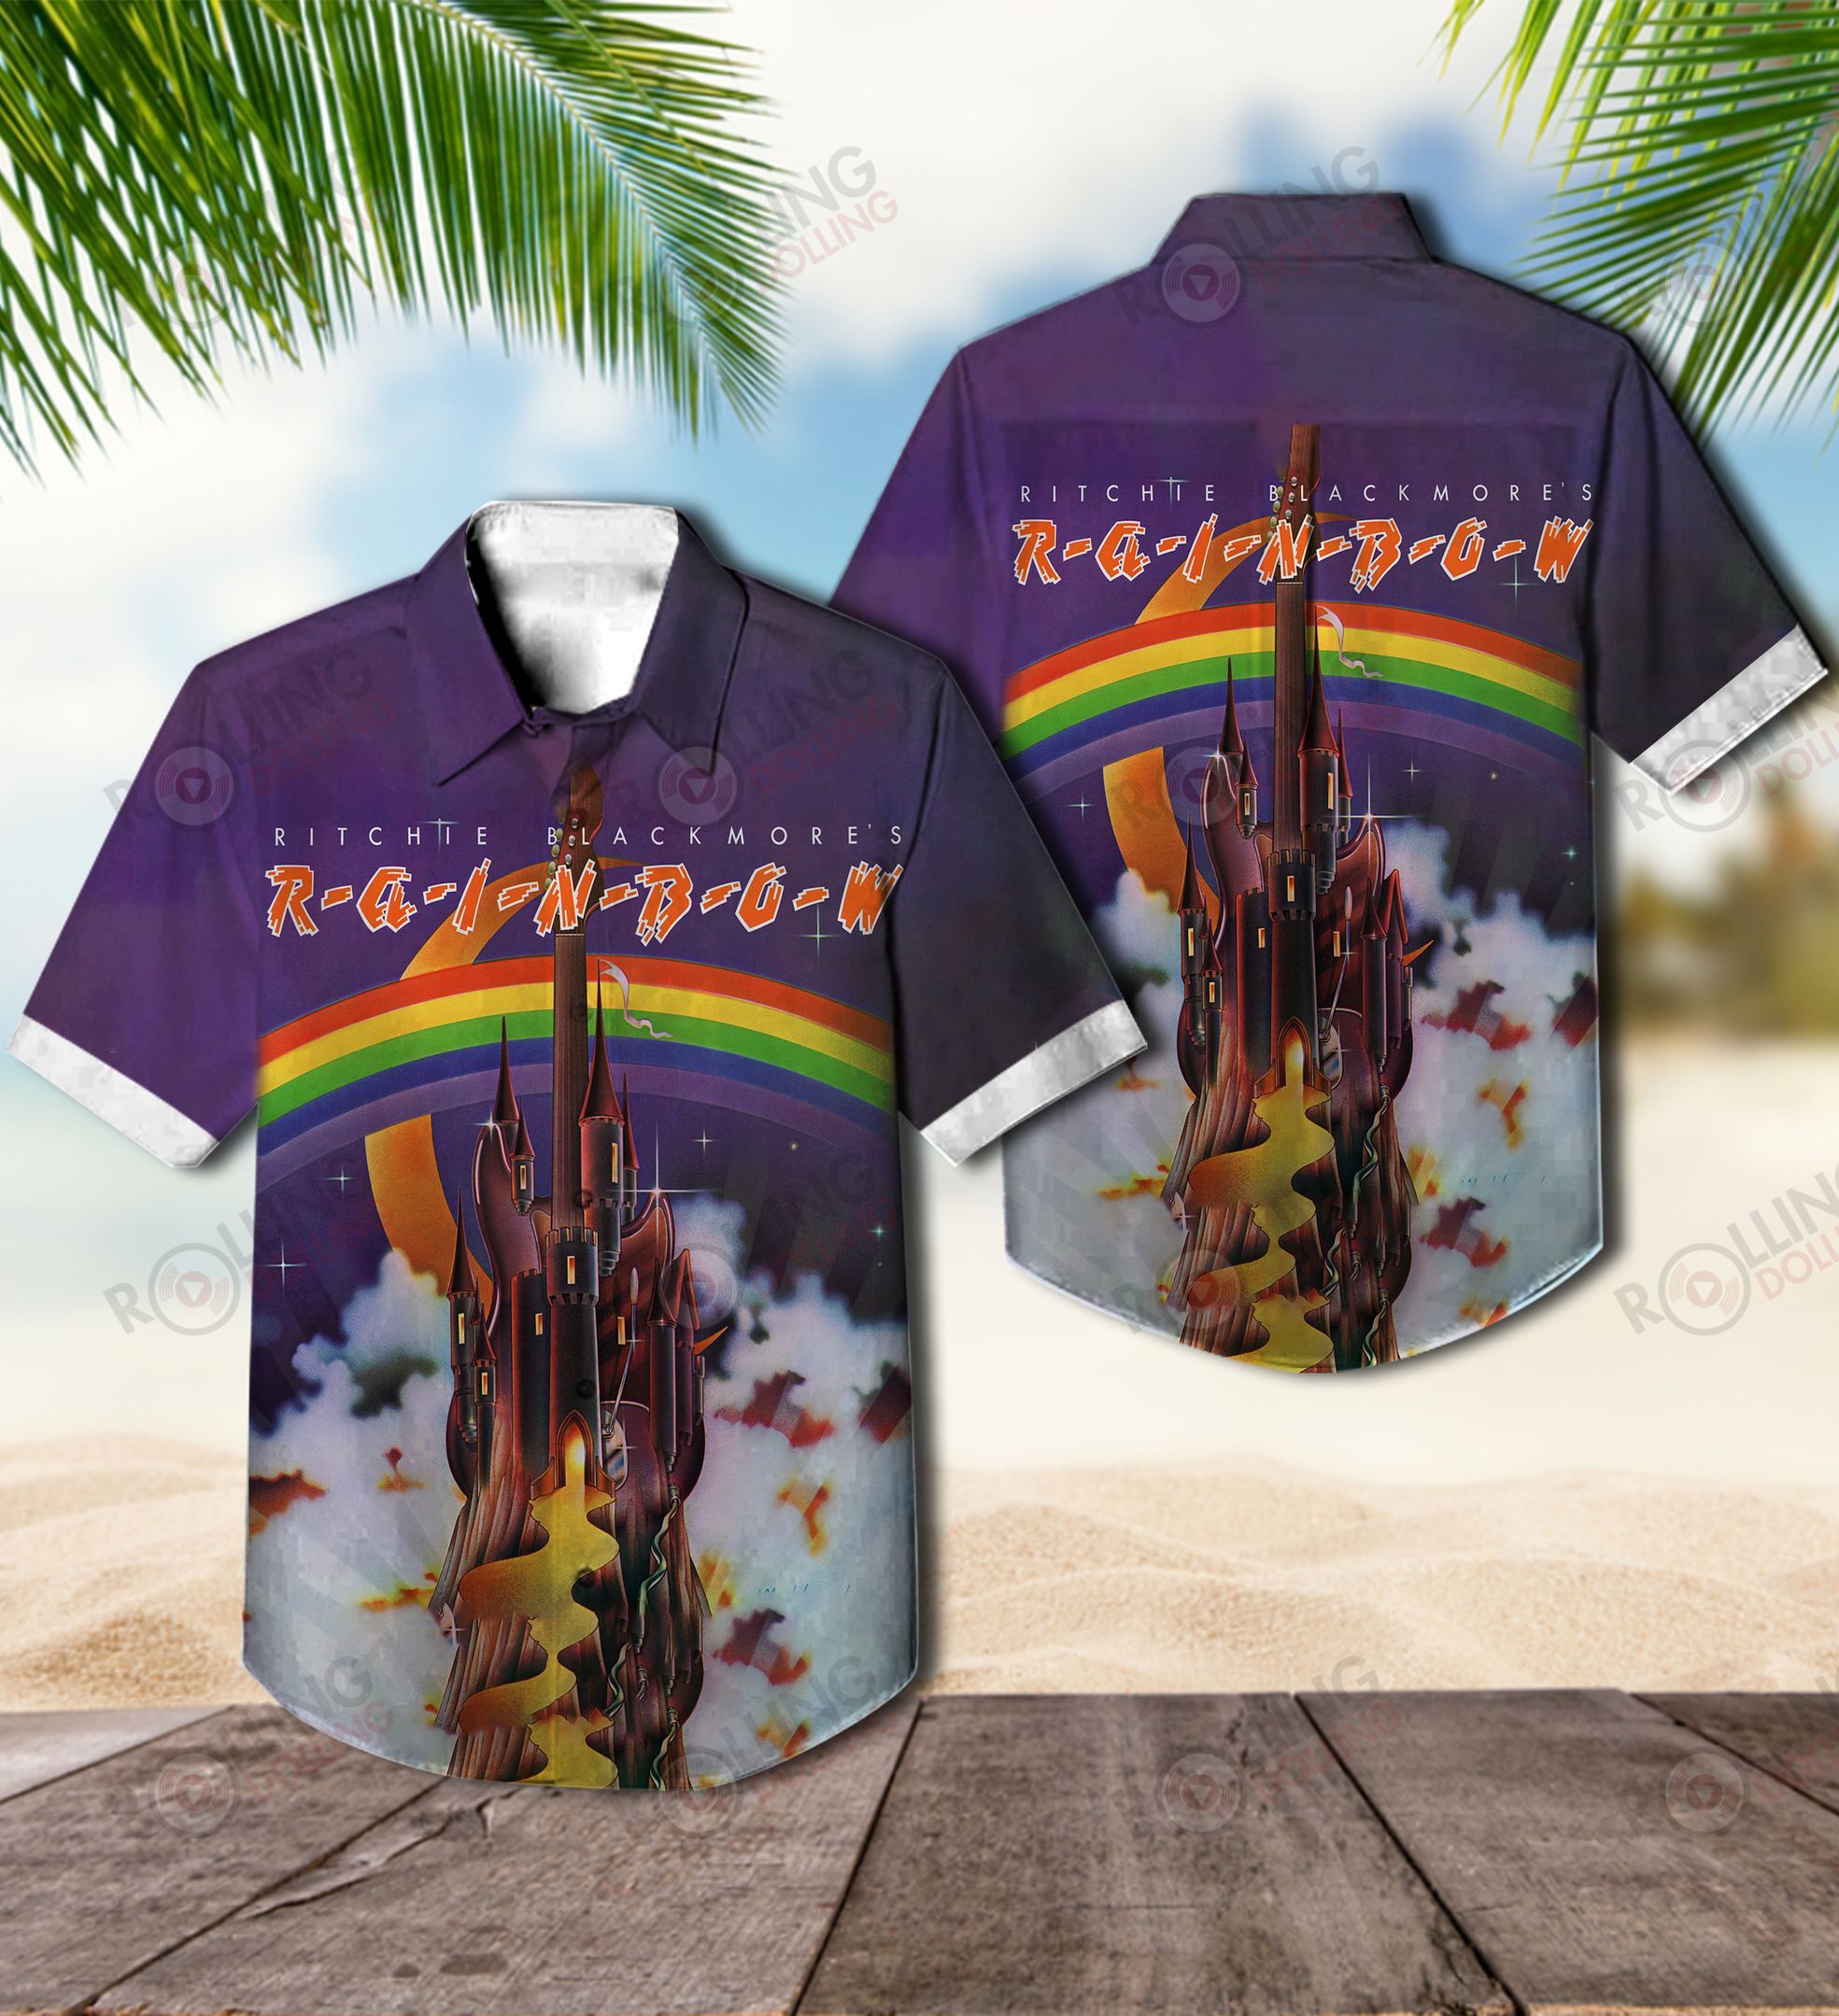 Now you can show off your love of all things band with this Hawaiian Shirt 37